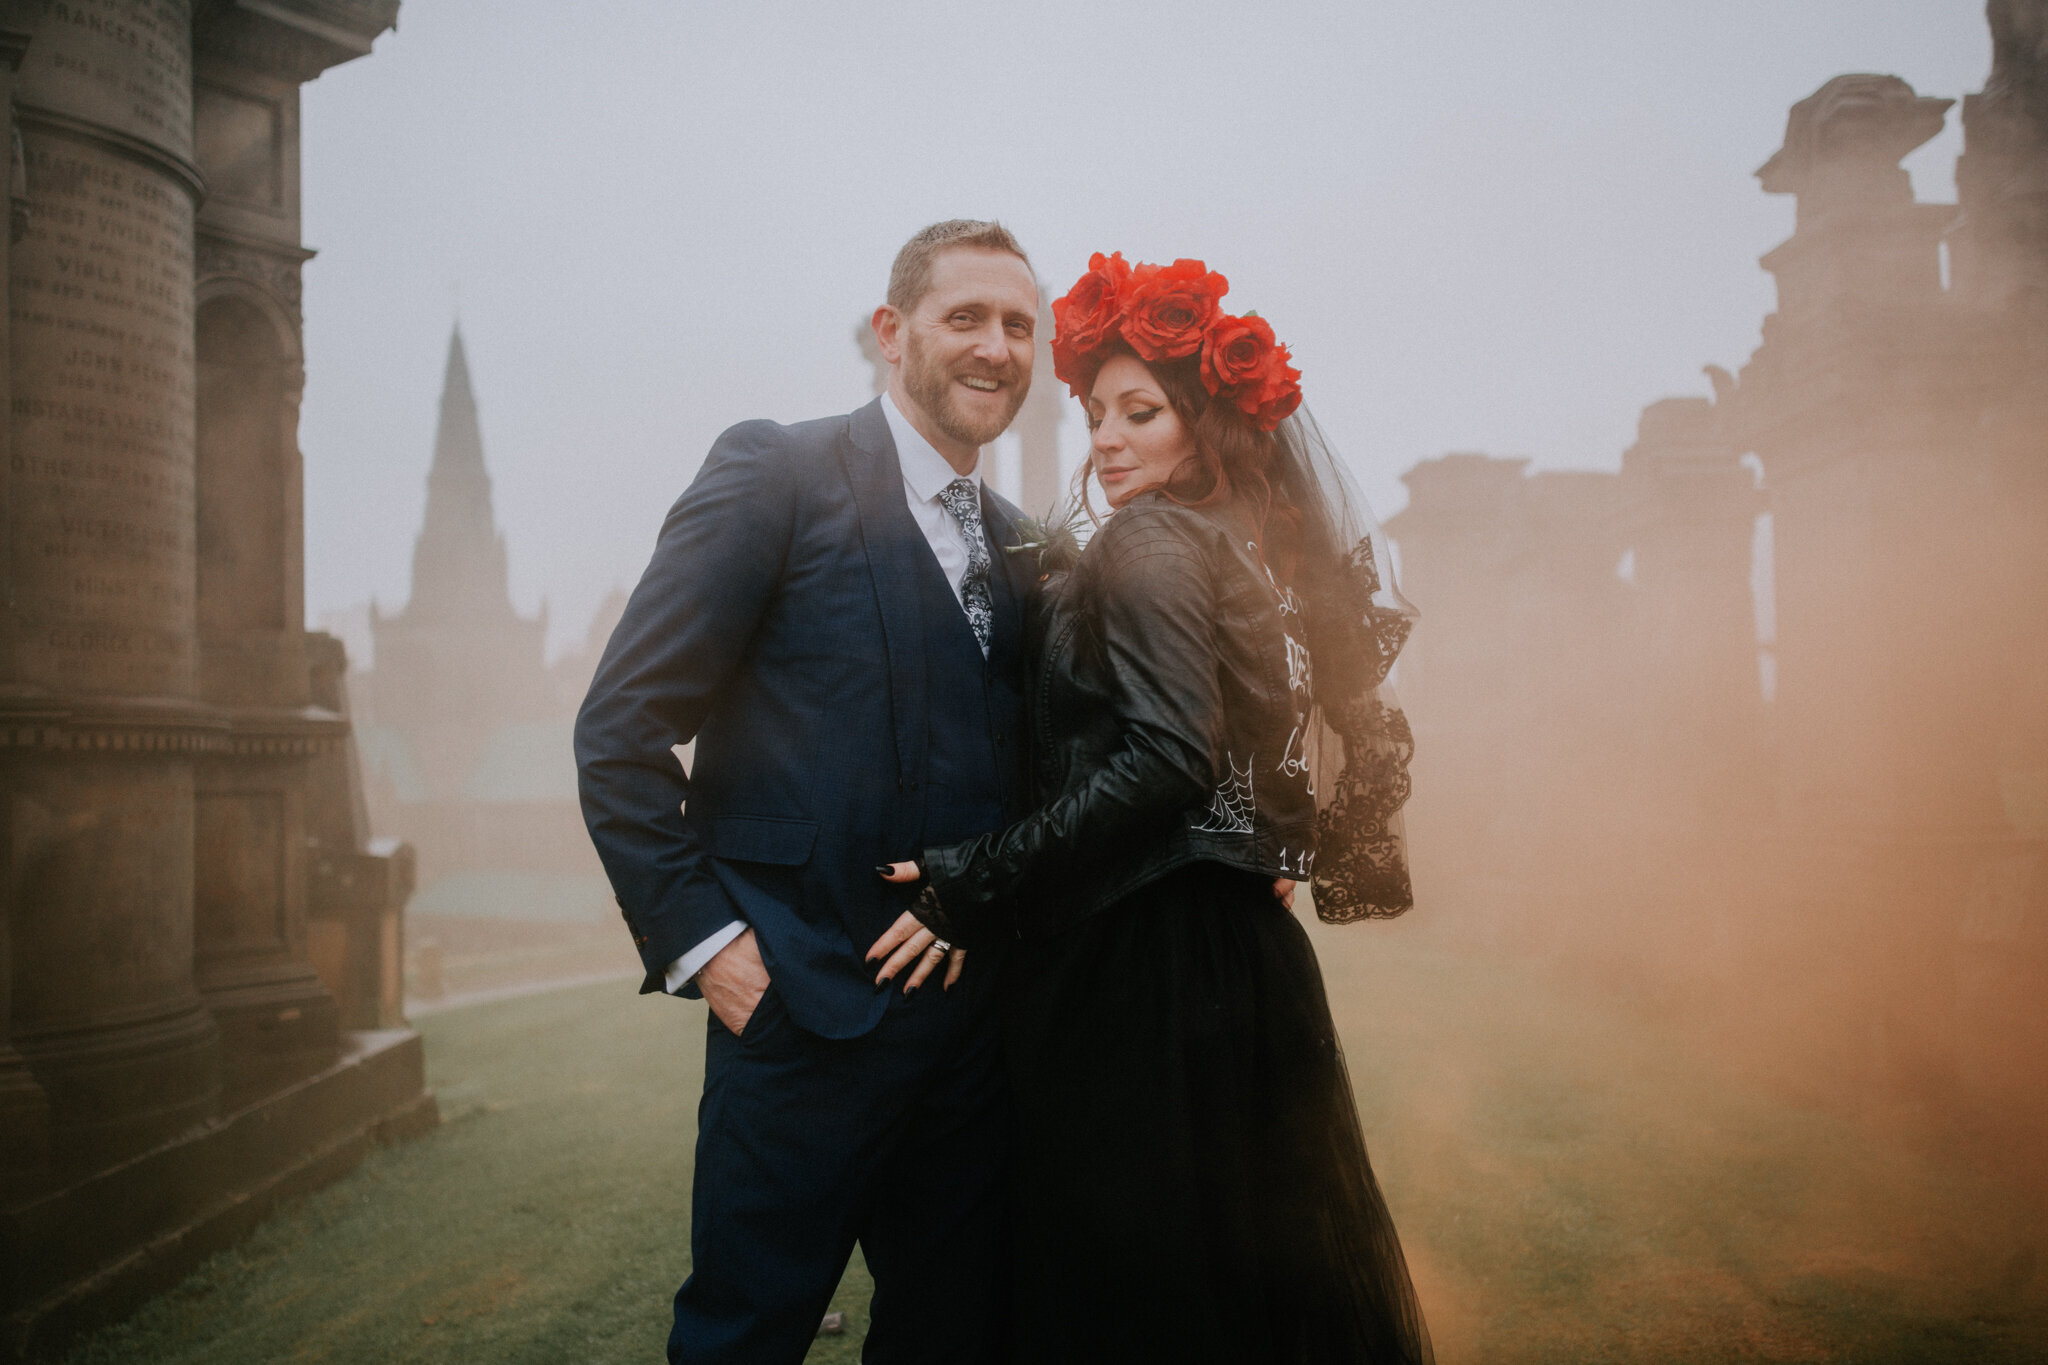 Wedding Polaroid Porn - Black & Red Halloween Inspired Quirky City Wedding | Glasgow Wedding  Photographer â€” In the Name of Love Photography